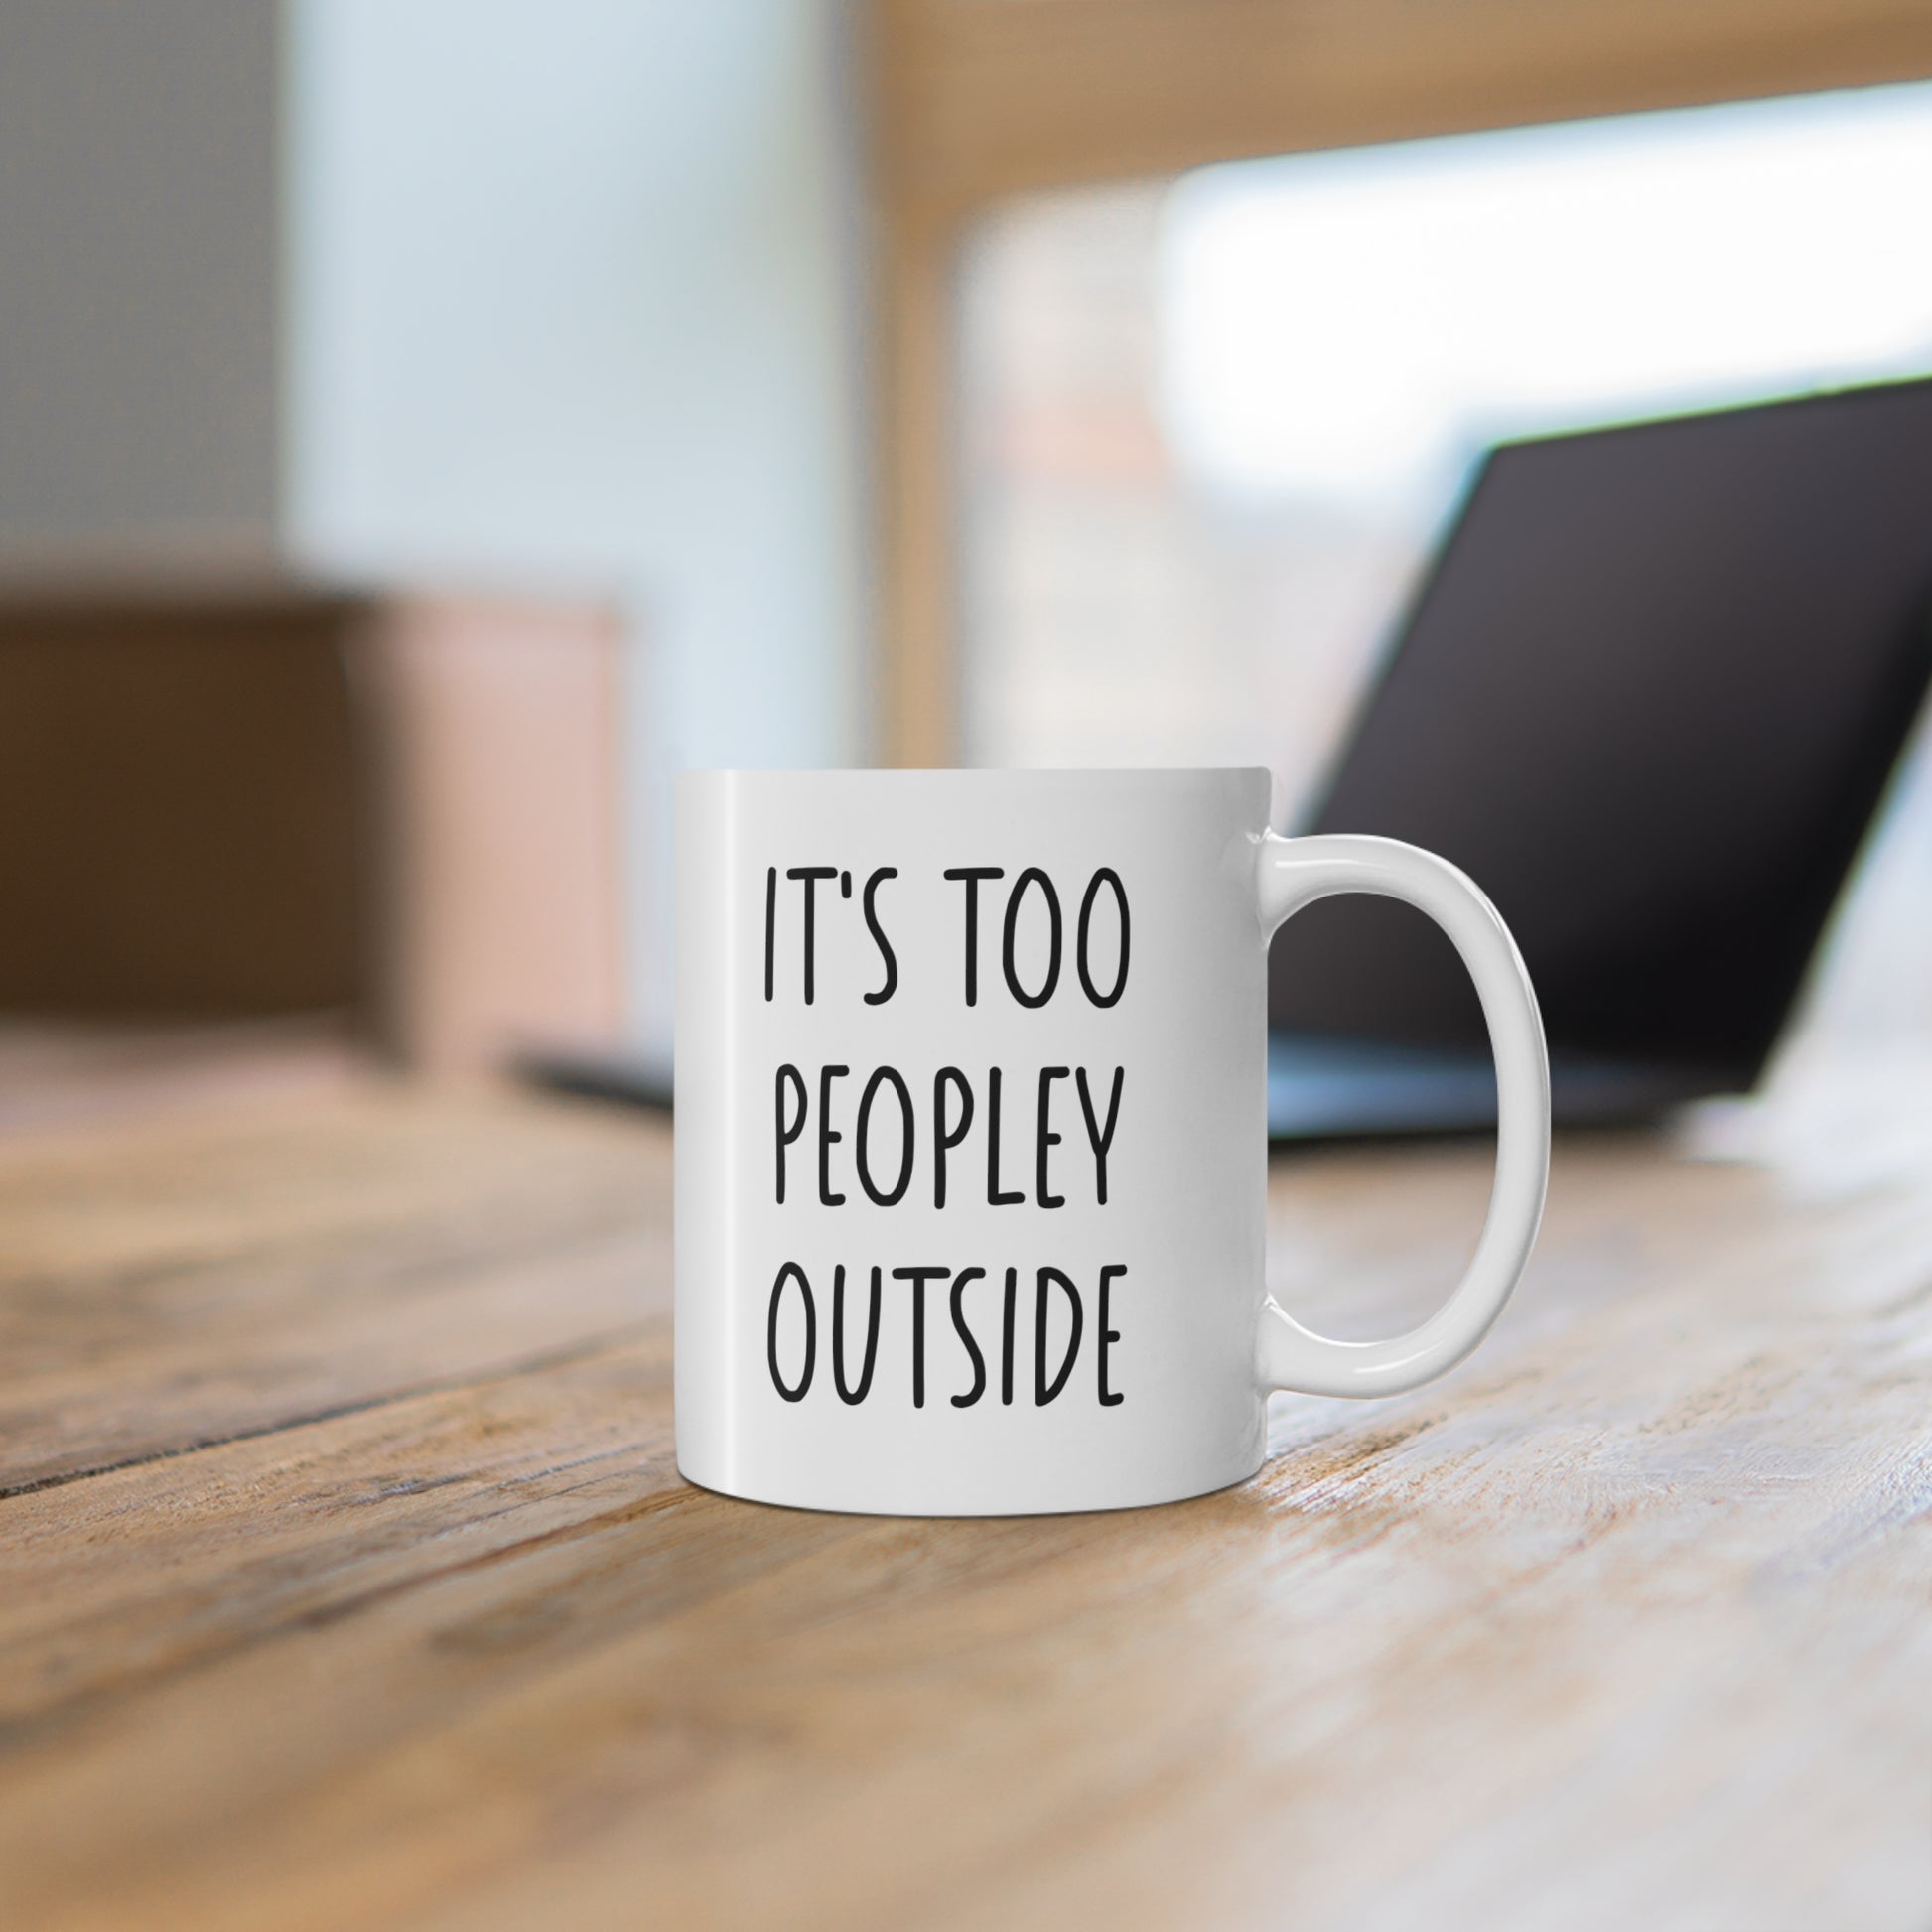 withe ceramic mug with quote: It's Too Peopley Outside